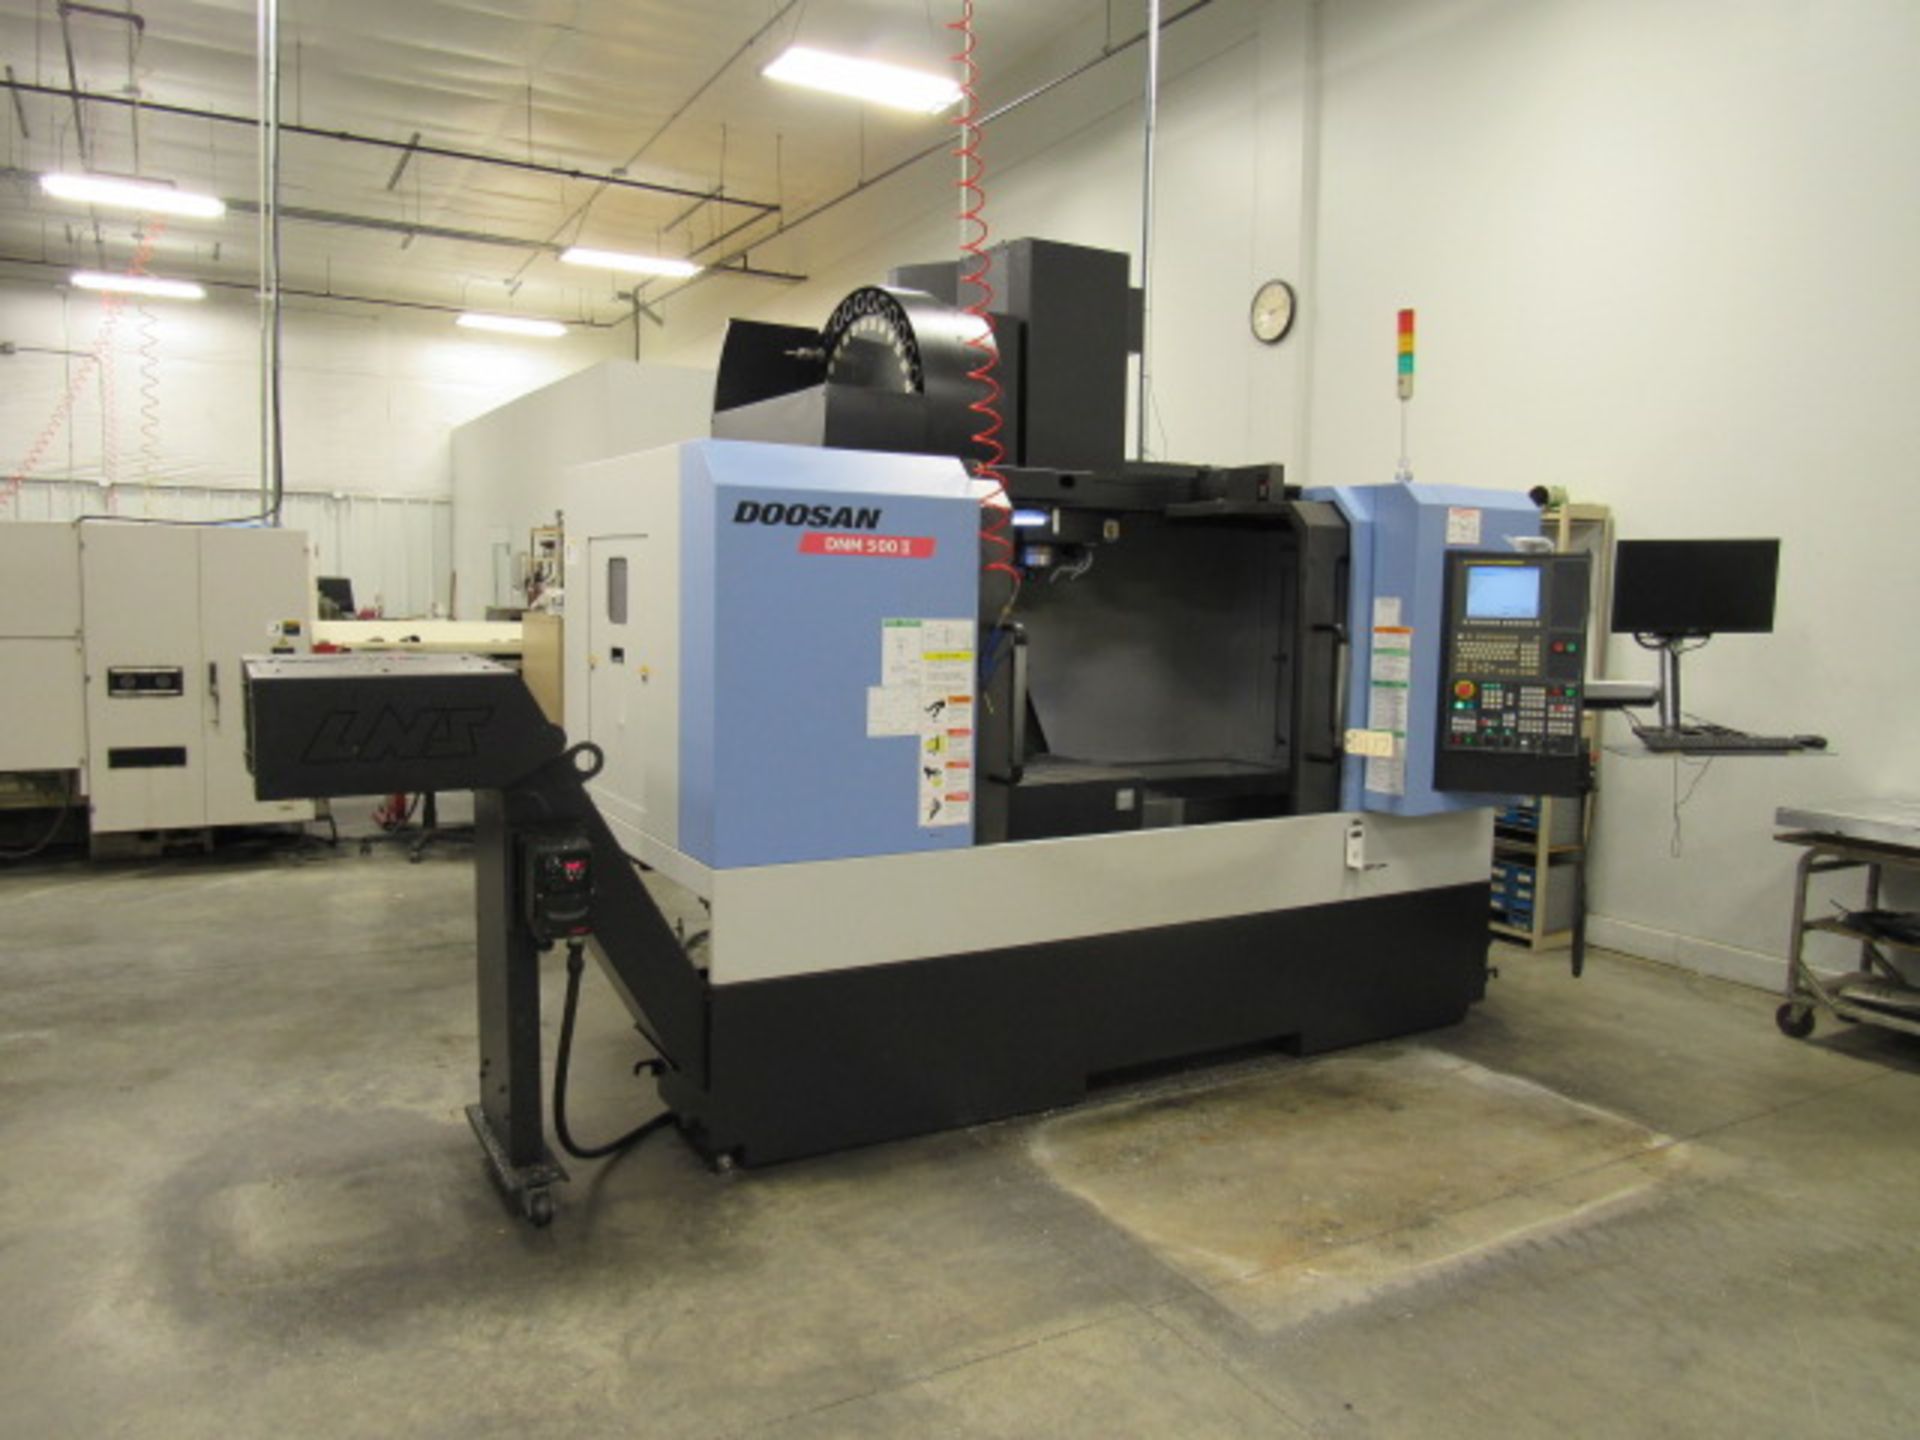 Doosan DNM 500 II CNC Vertical Machining Centers with 47.2'' x 21.2'' Tables, Big Plus #40, - Image 5 of 9